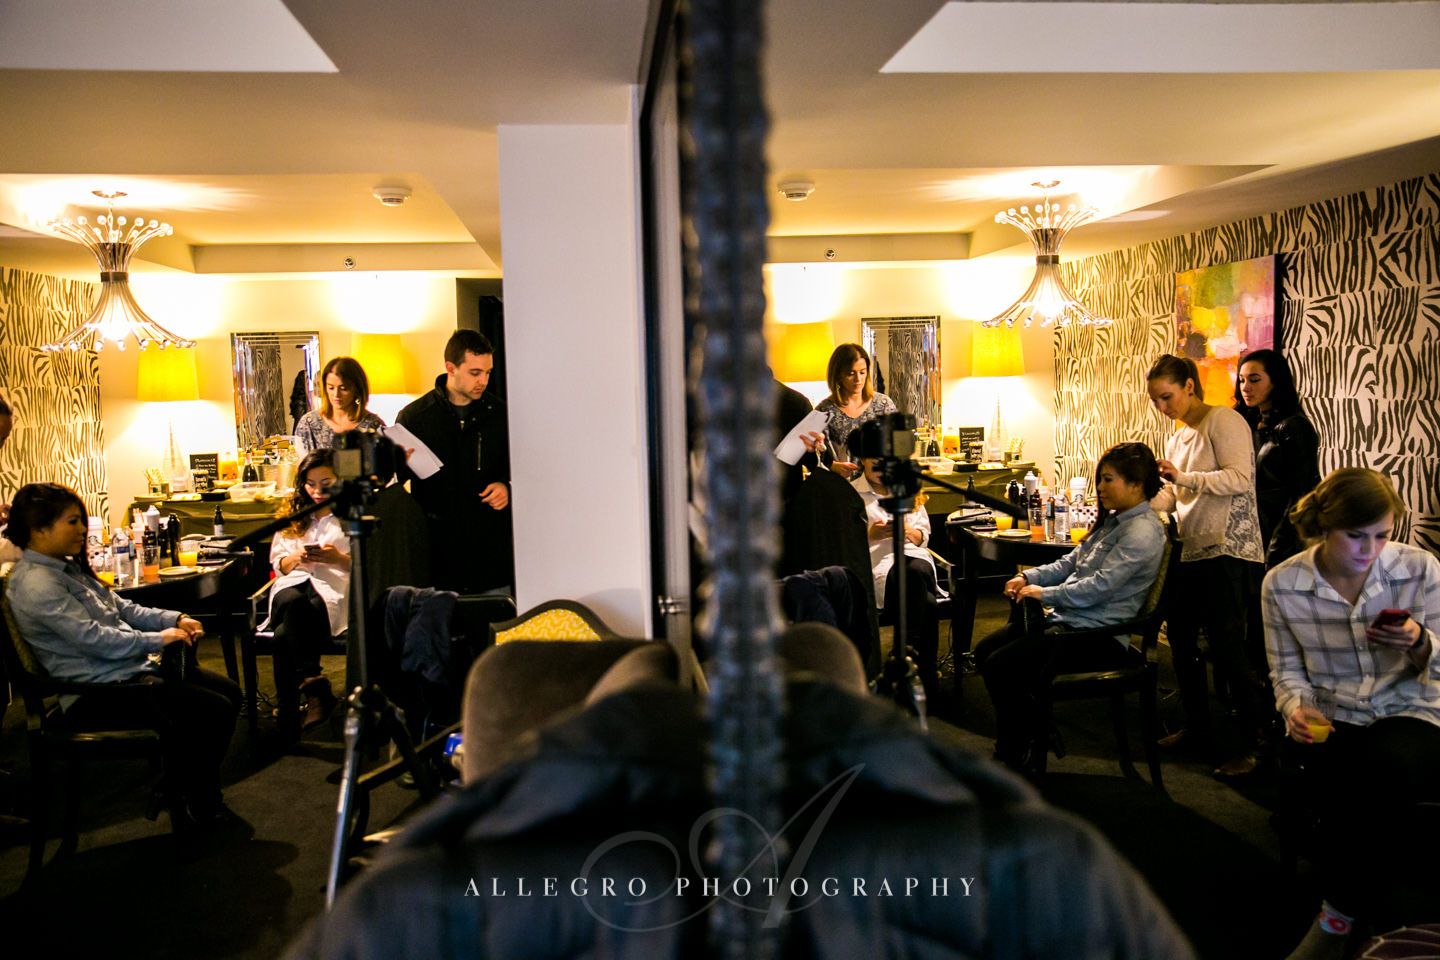 getting ready for the wedding day at hotel nine zero -photo by allegro photography